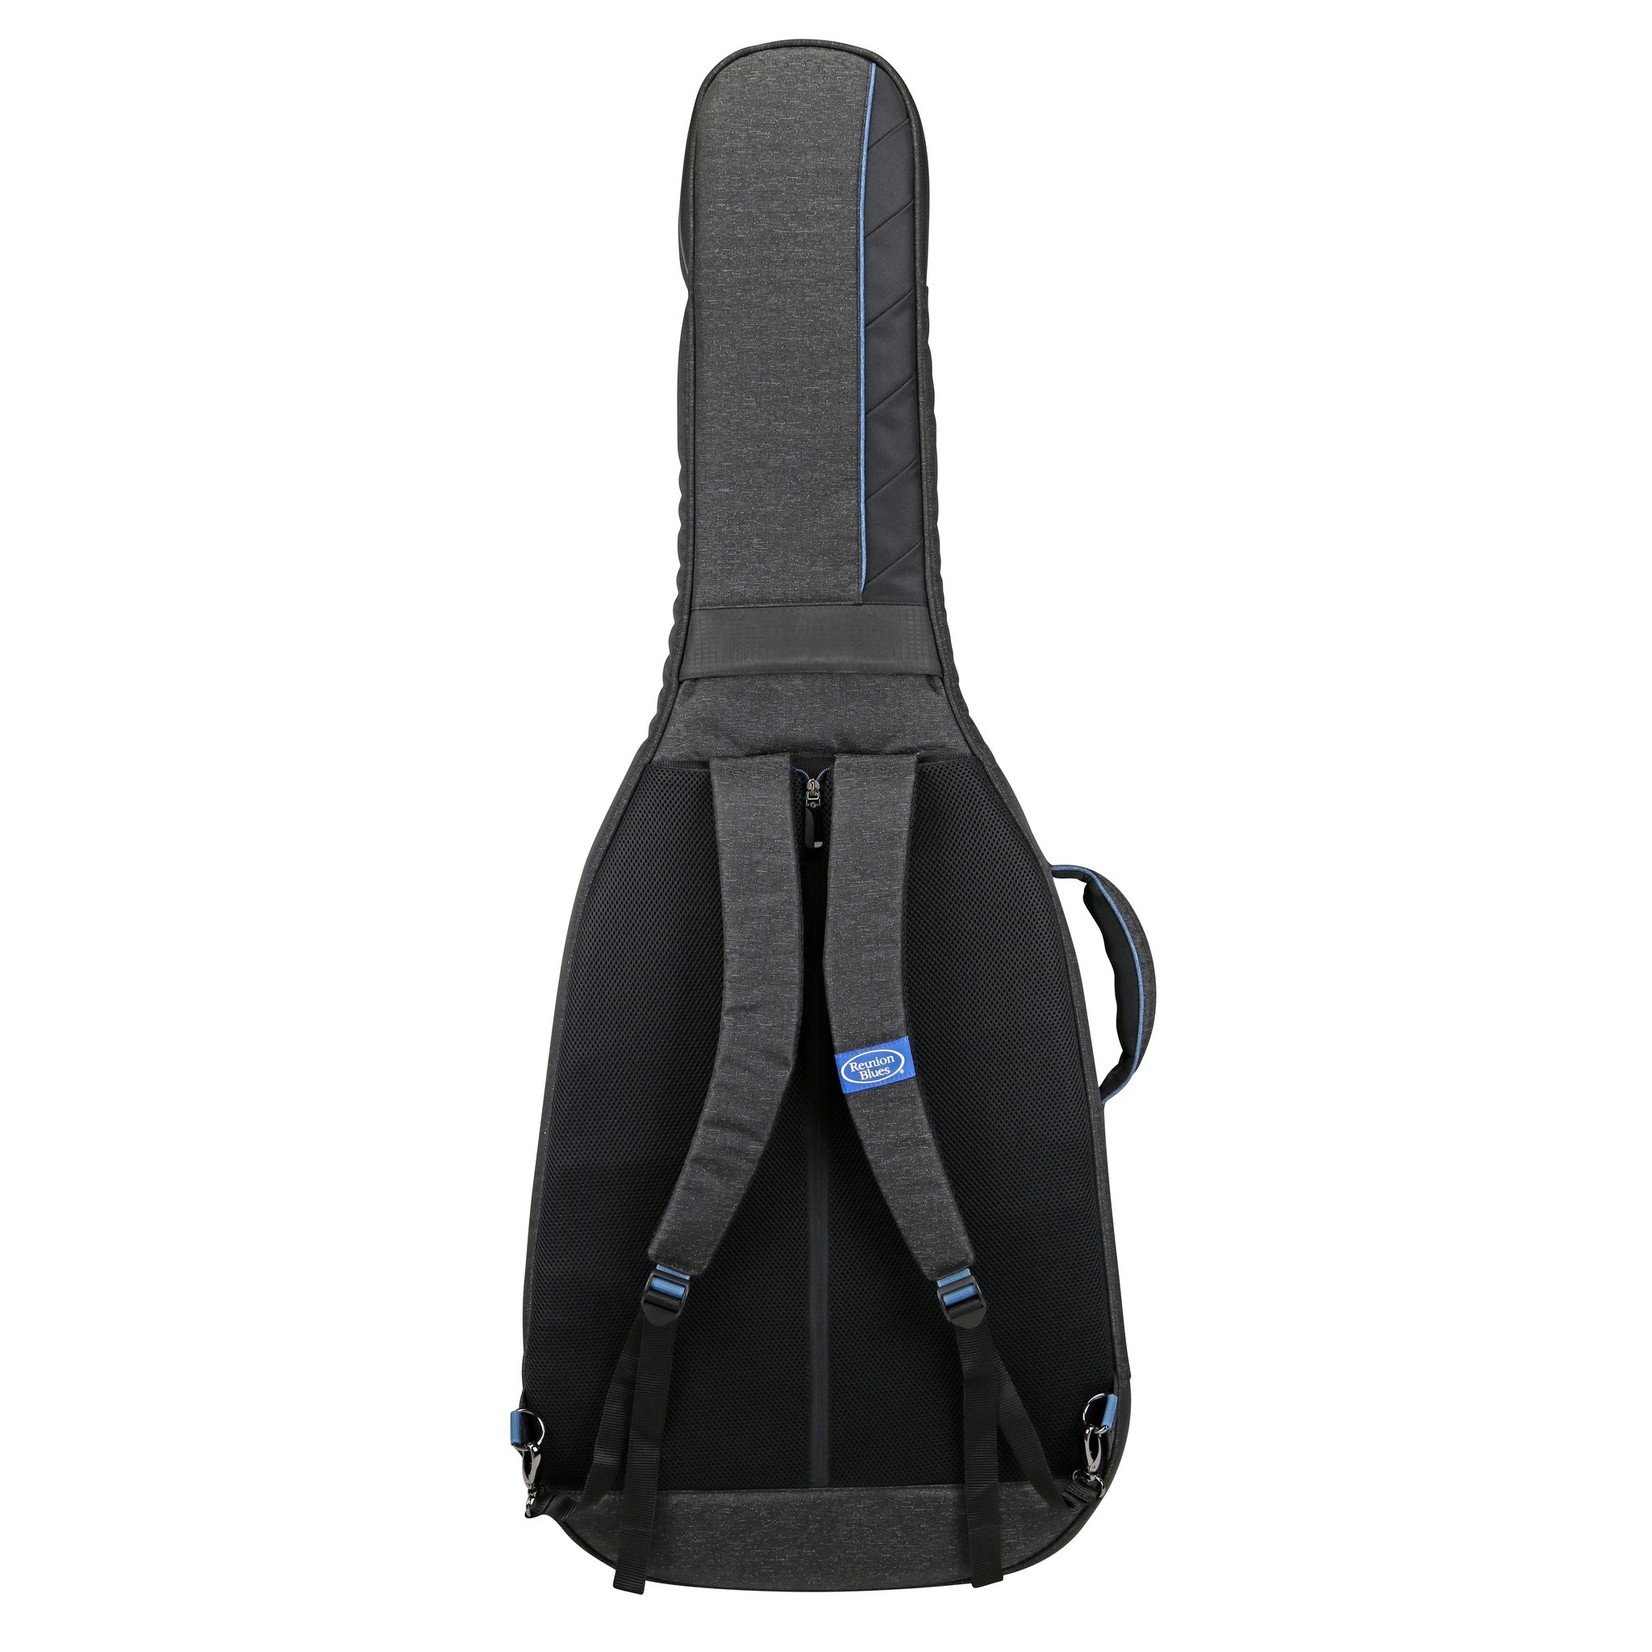 Reunion Blues Reunion Blues RB Continental Voyager Semi-Hollow Body Electric Guitar Case (Gig bag, hybrid, RBCSH)